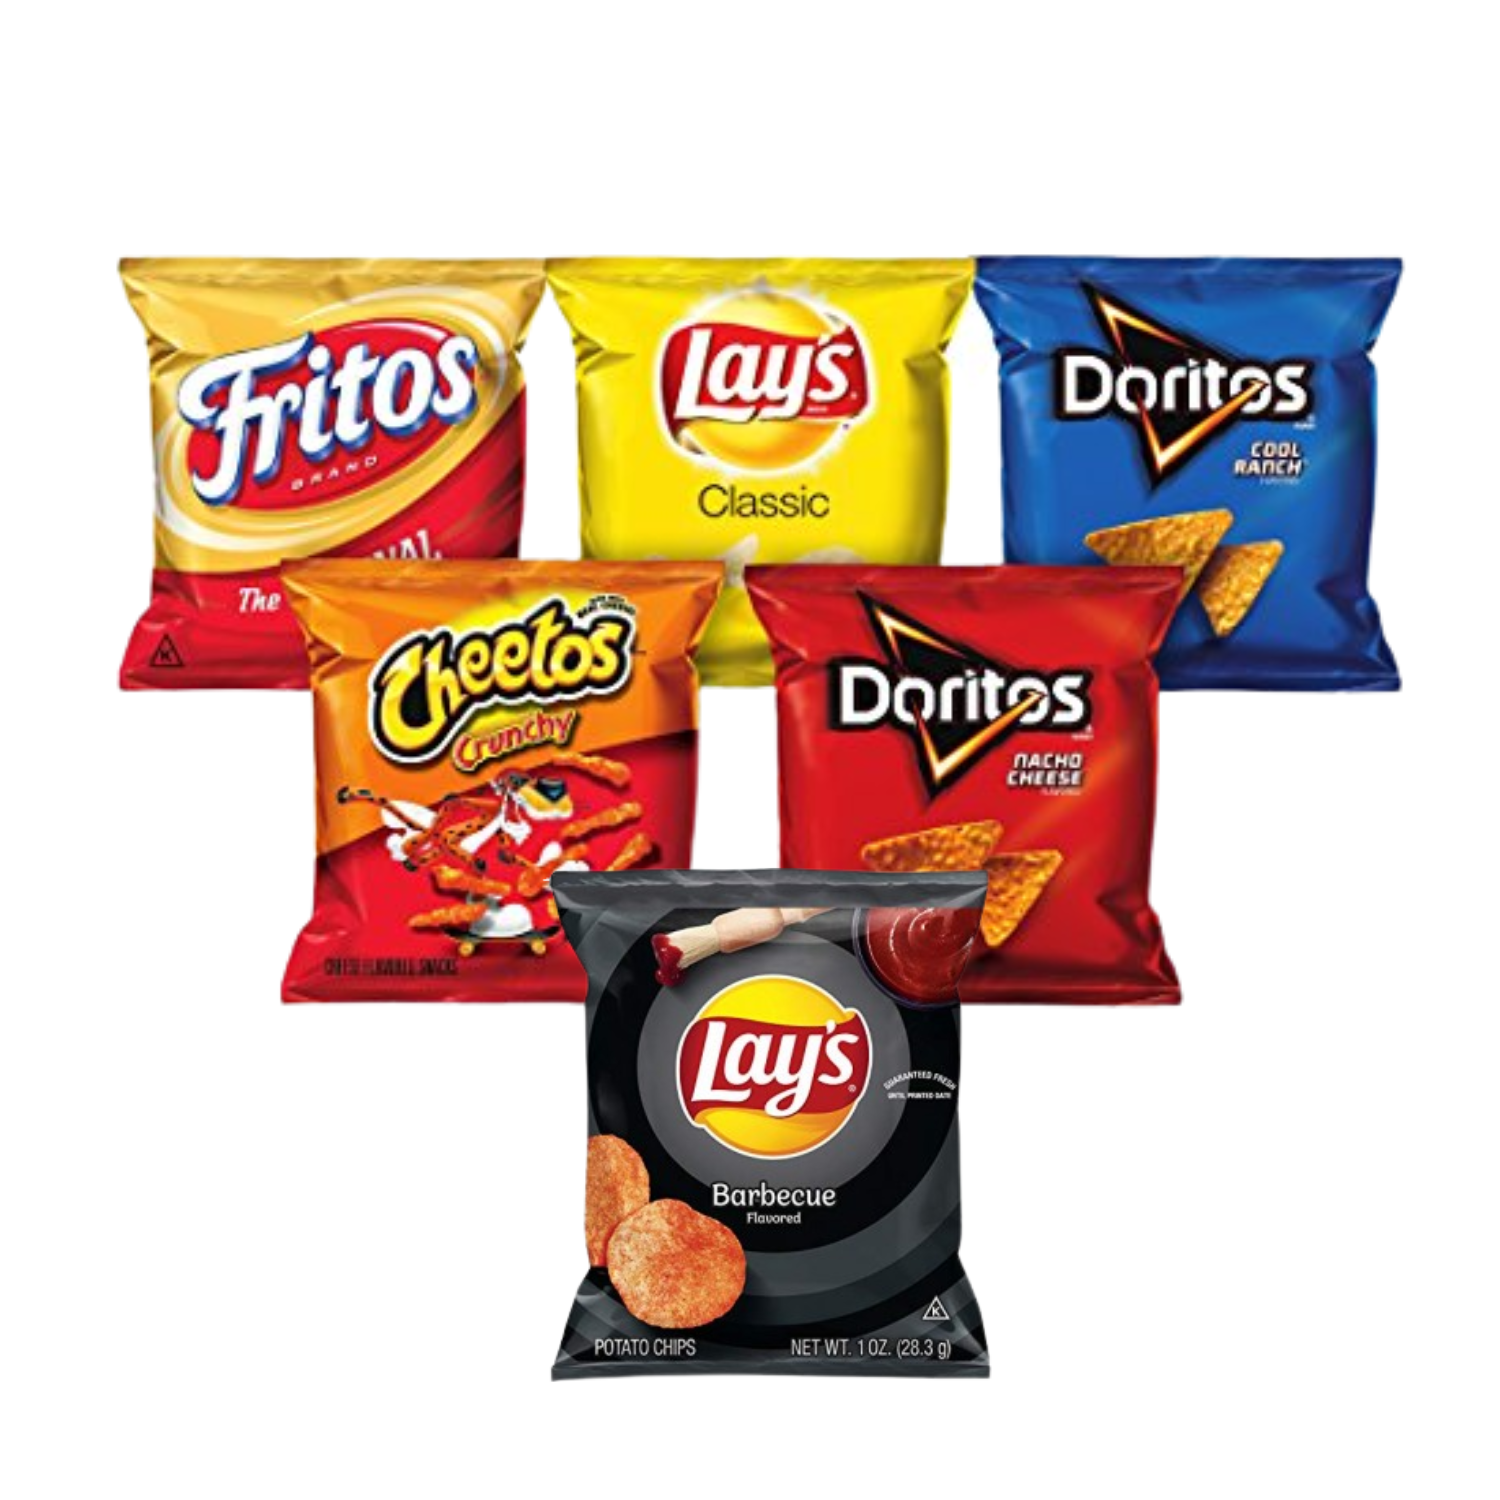 Frito-Lay® Introduces Minis: New Bite-Sized Versions of Iconic Doritos®,  Cheetos® and SunChips® Flavors